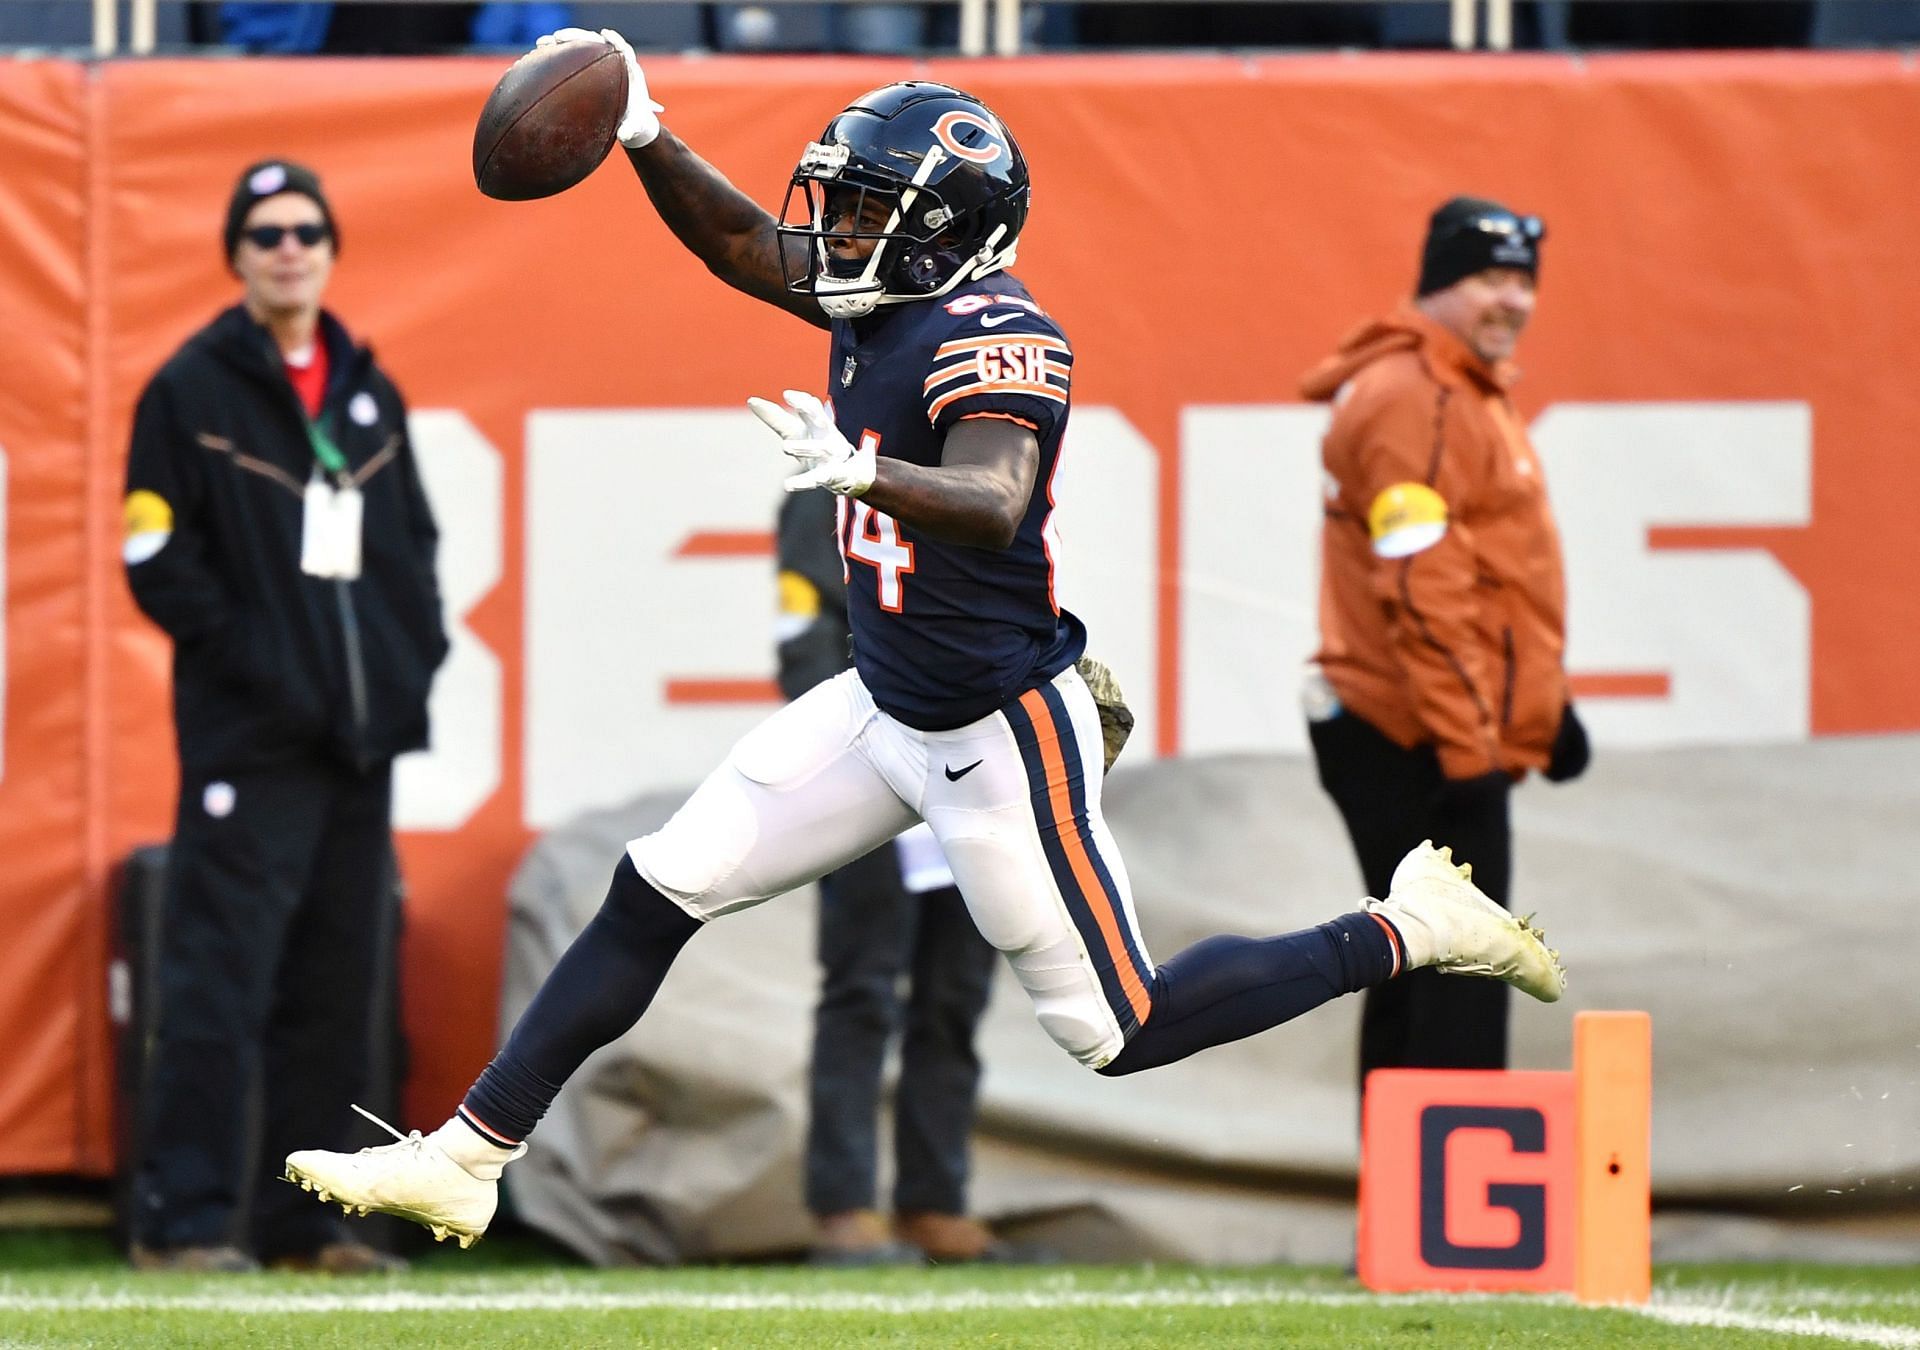 Chicago Bears wide receiver Marquise Goodwin